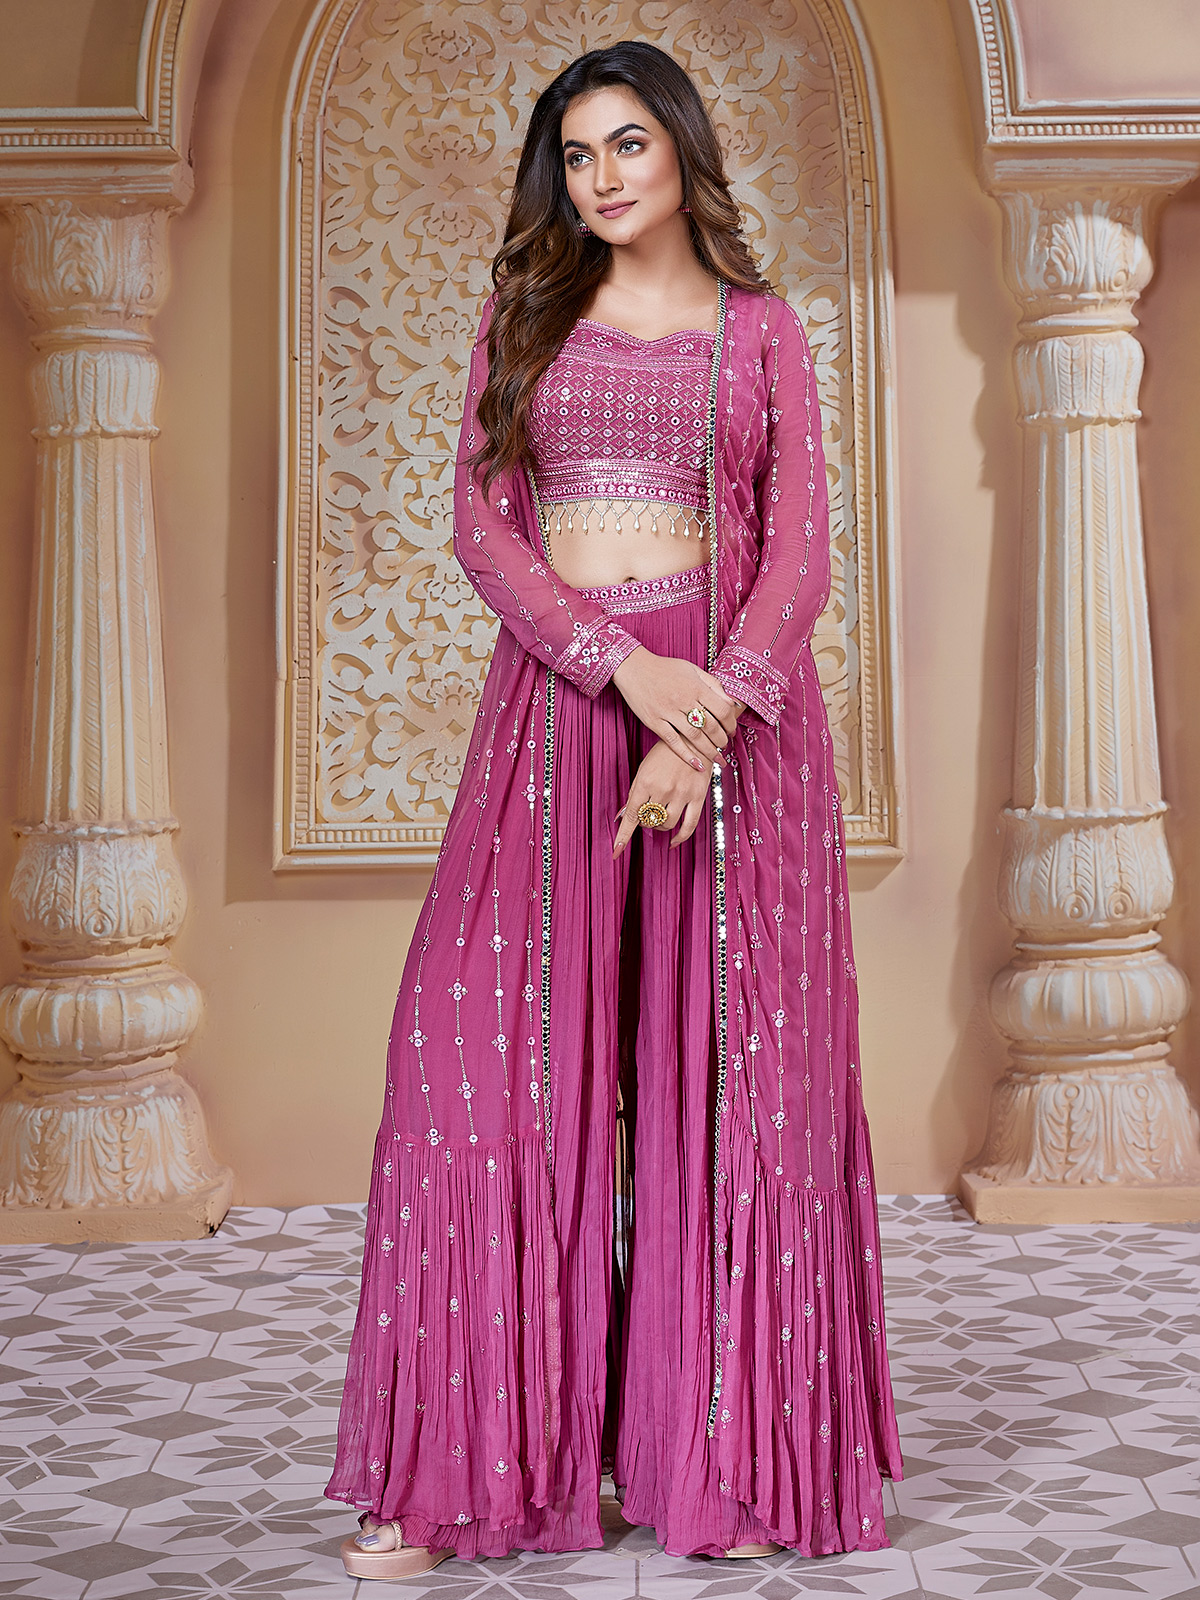 Red Anarkali Suit Designs With Gold Border | New Red Gown for Wedding